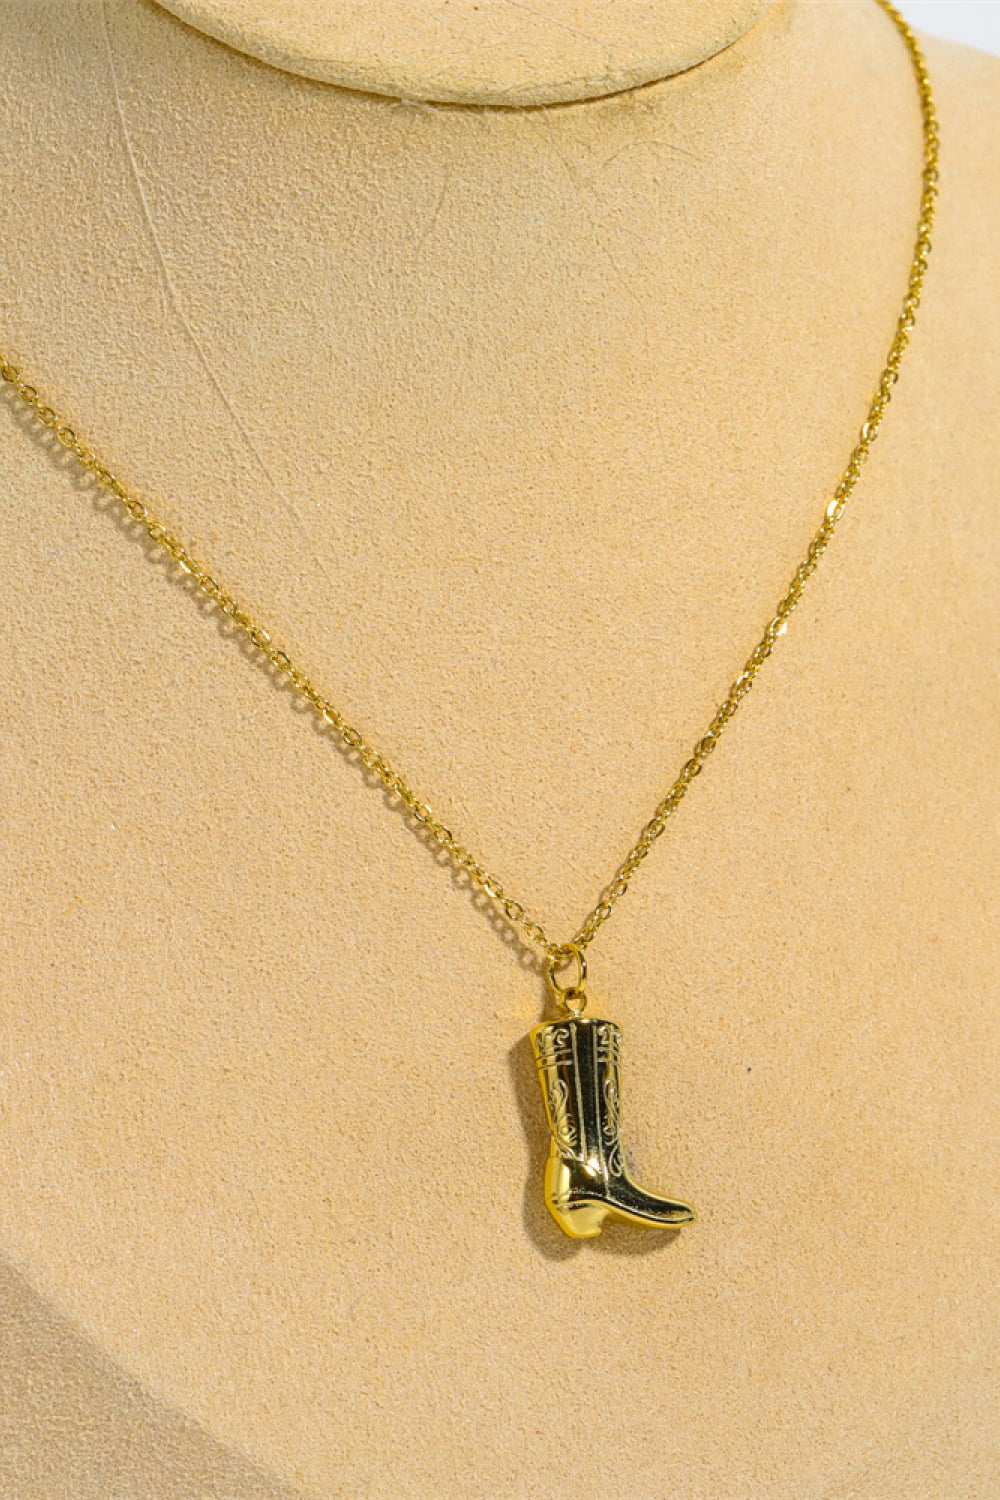 Cowboy Boot Pendant Stainless Steel Necklace - Online Only